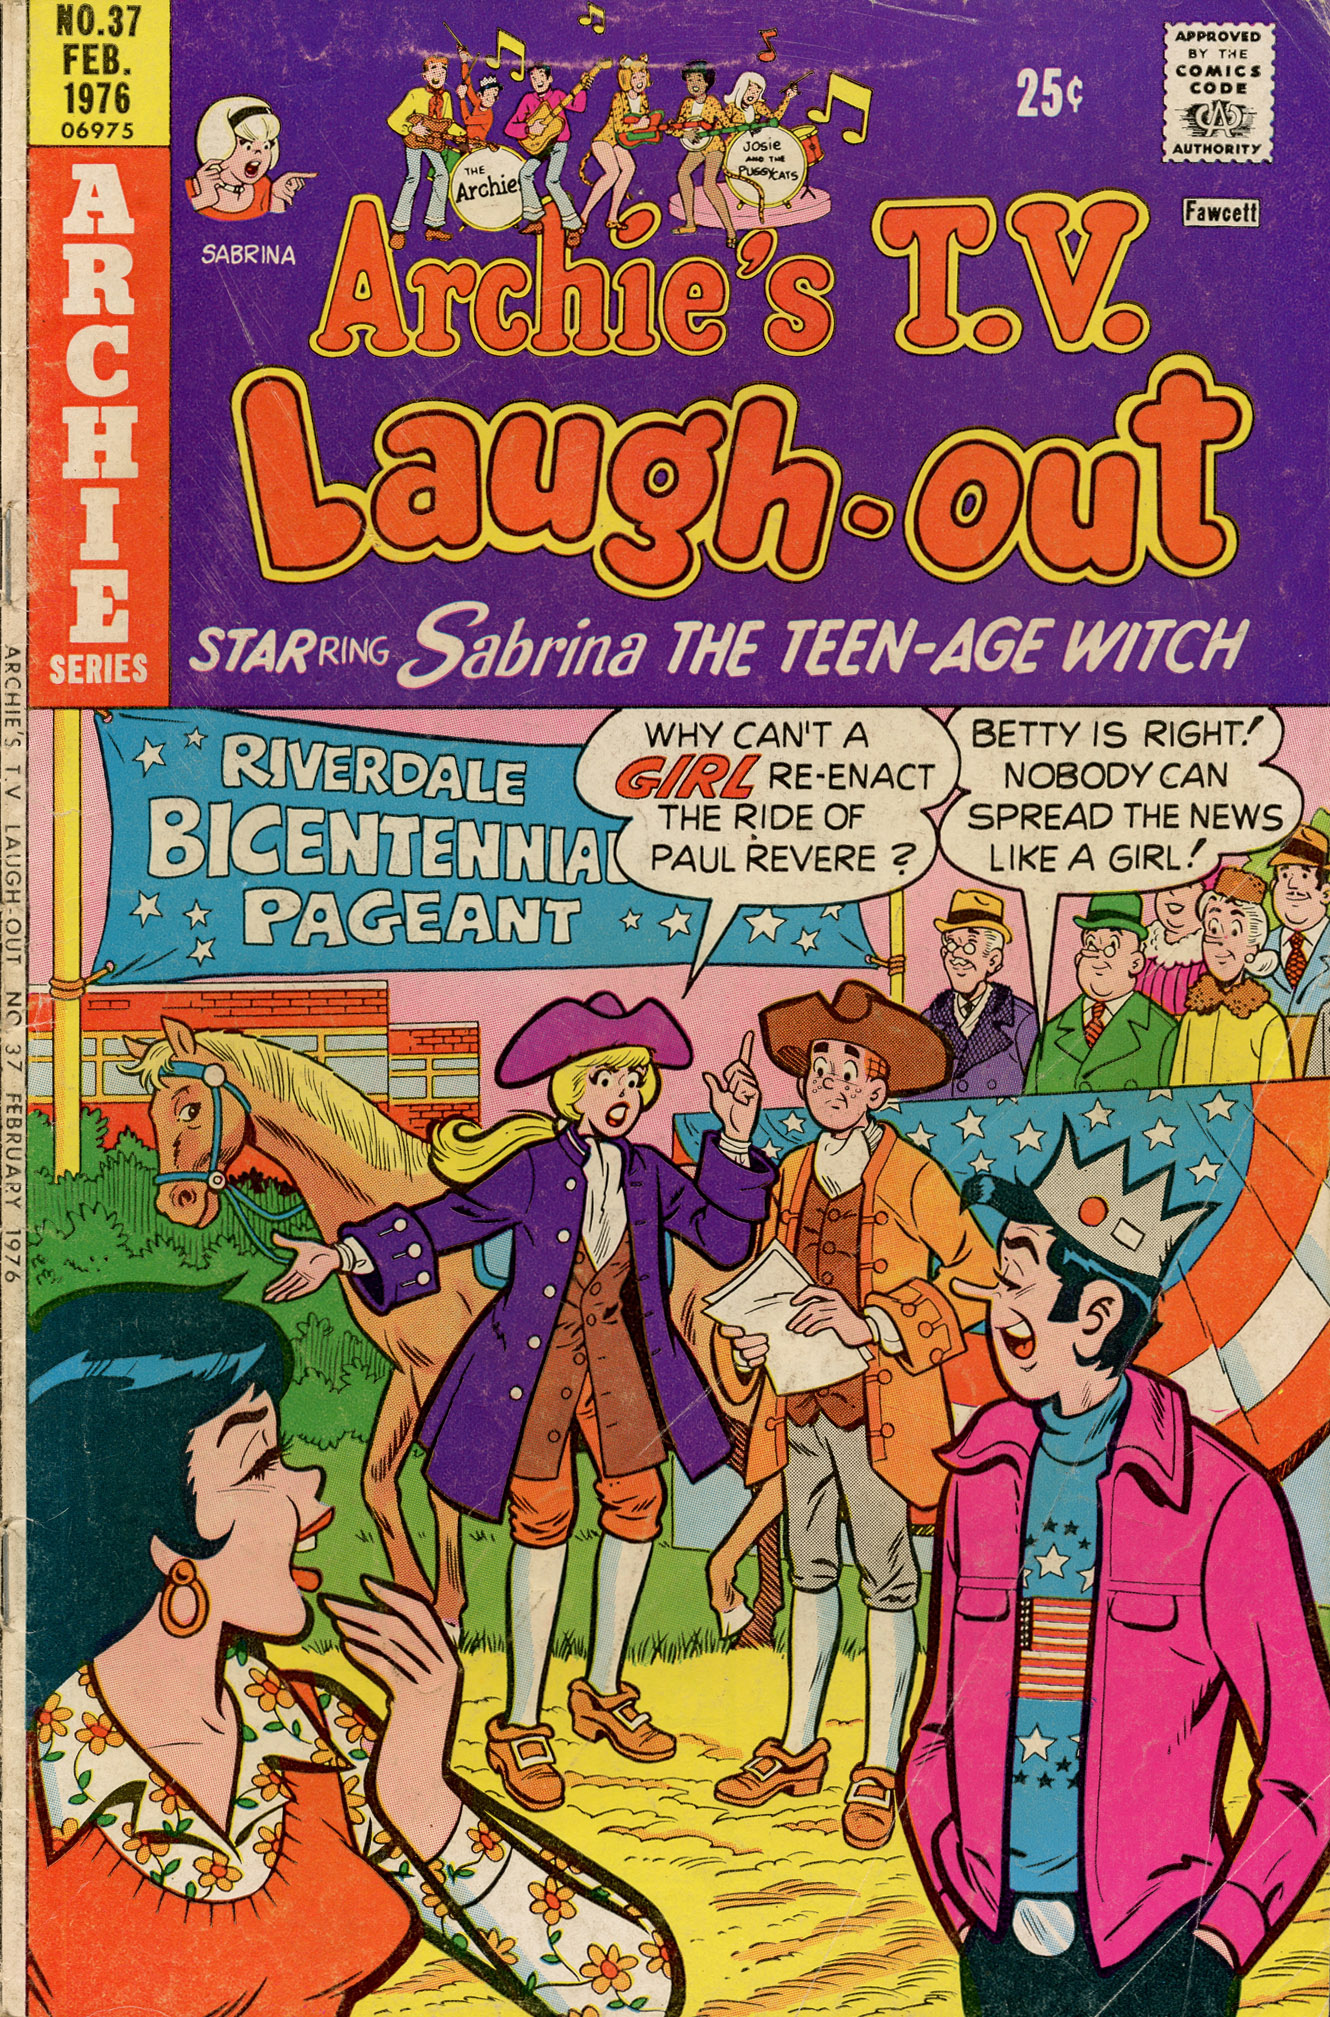 Read online Archie's TV Laugh-Out comic -  Issue #37 - 1